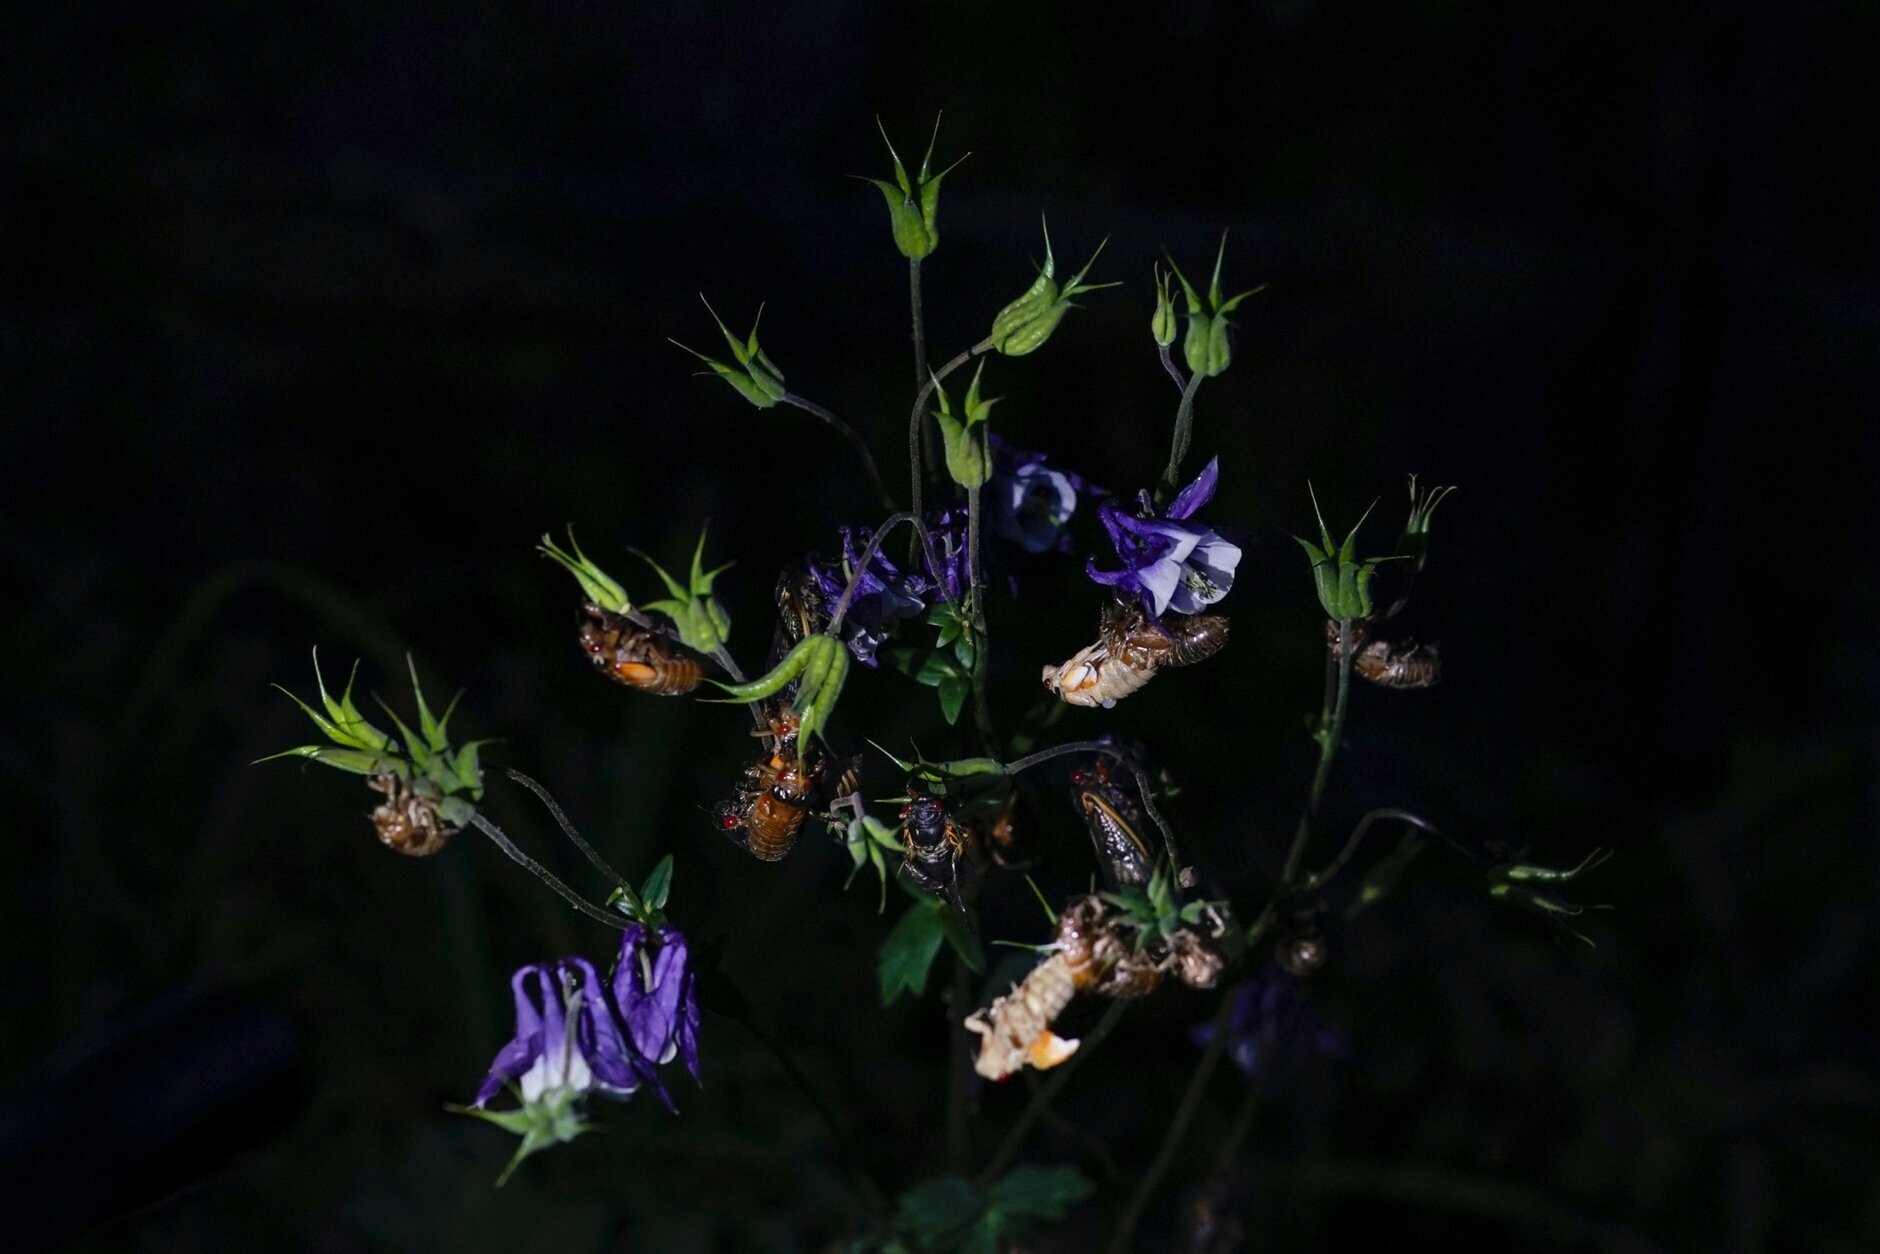 Cicadas, adults and nymphs shedding their shells cling to a flowering plant in a Columbia, Md., garden, Monday, May 17, 2021. (AP Photo/Carolyn Kaster)